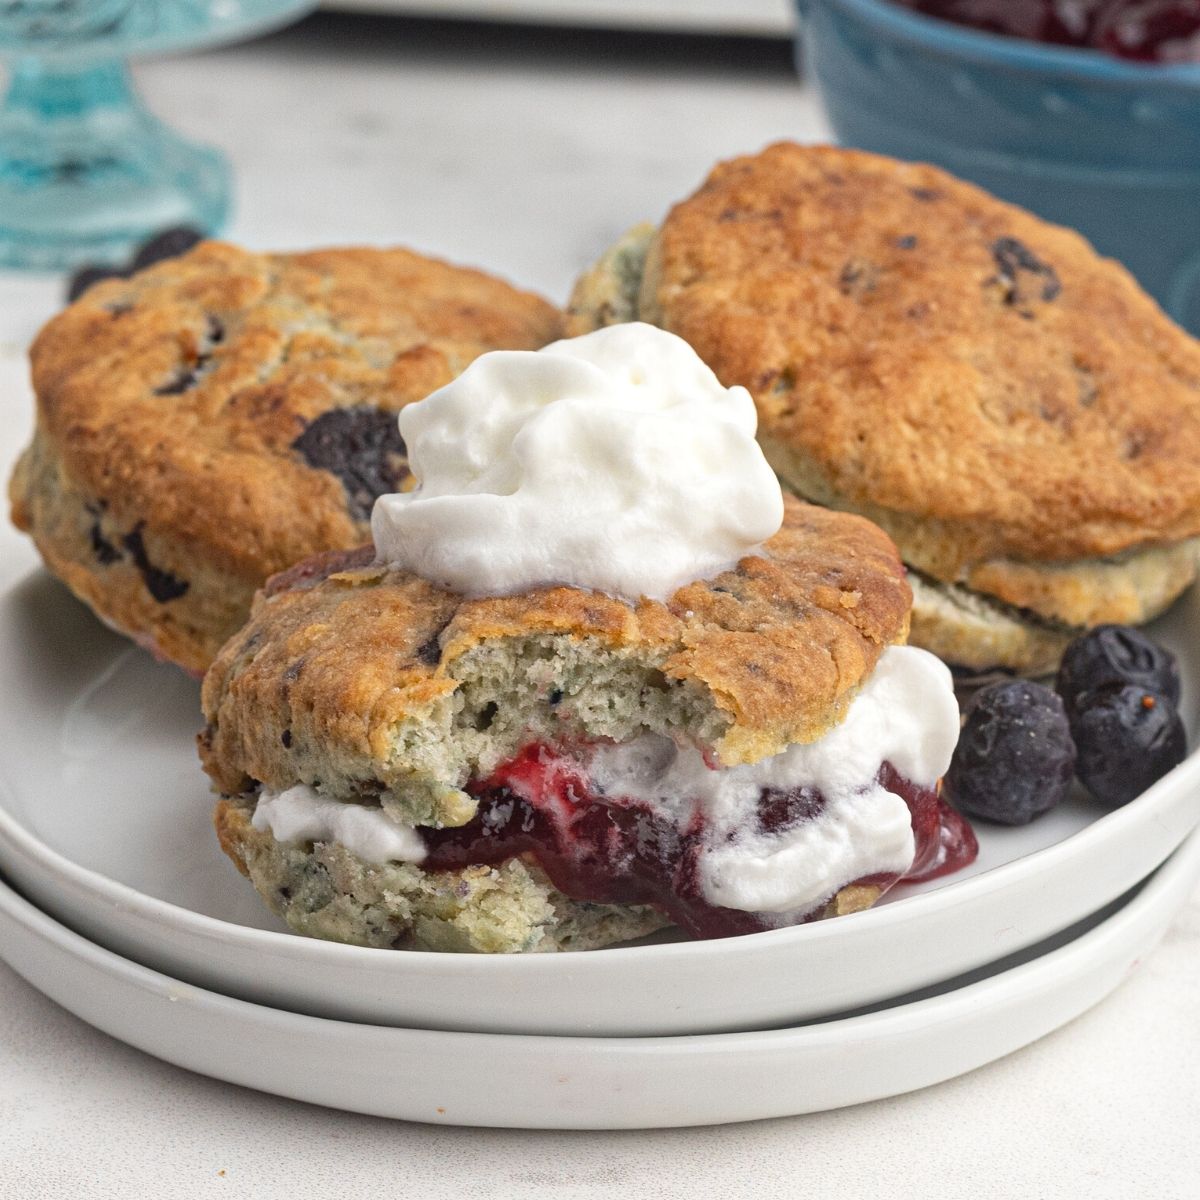 Air fryer blueberry scones, filled with jam and cream, served on a white plate.